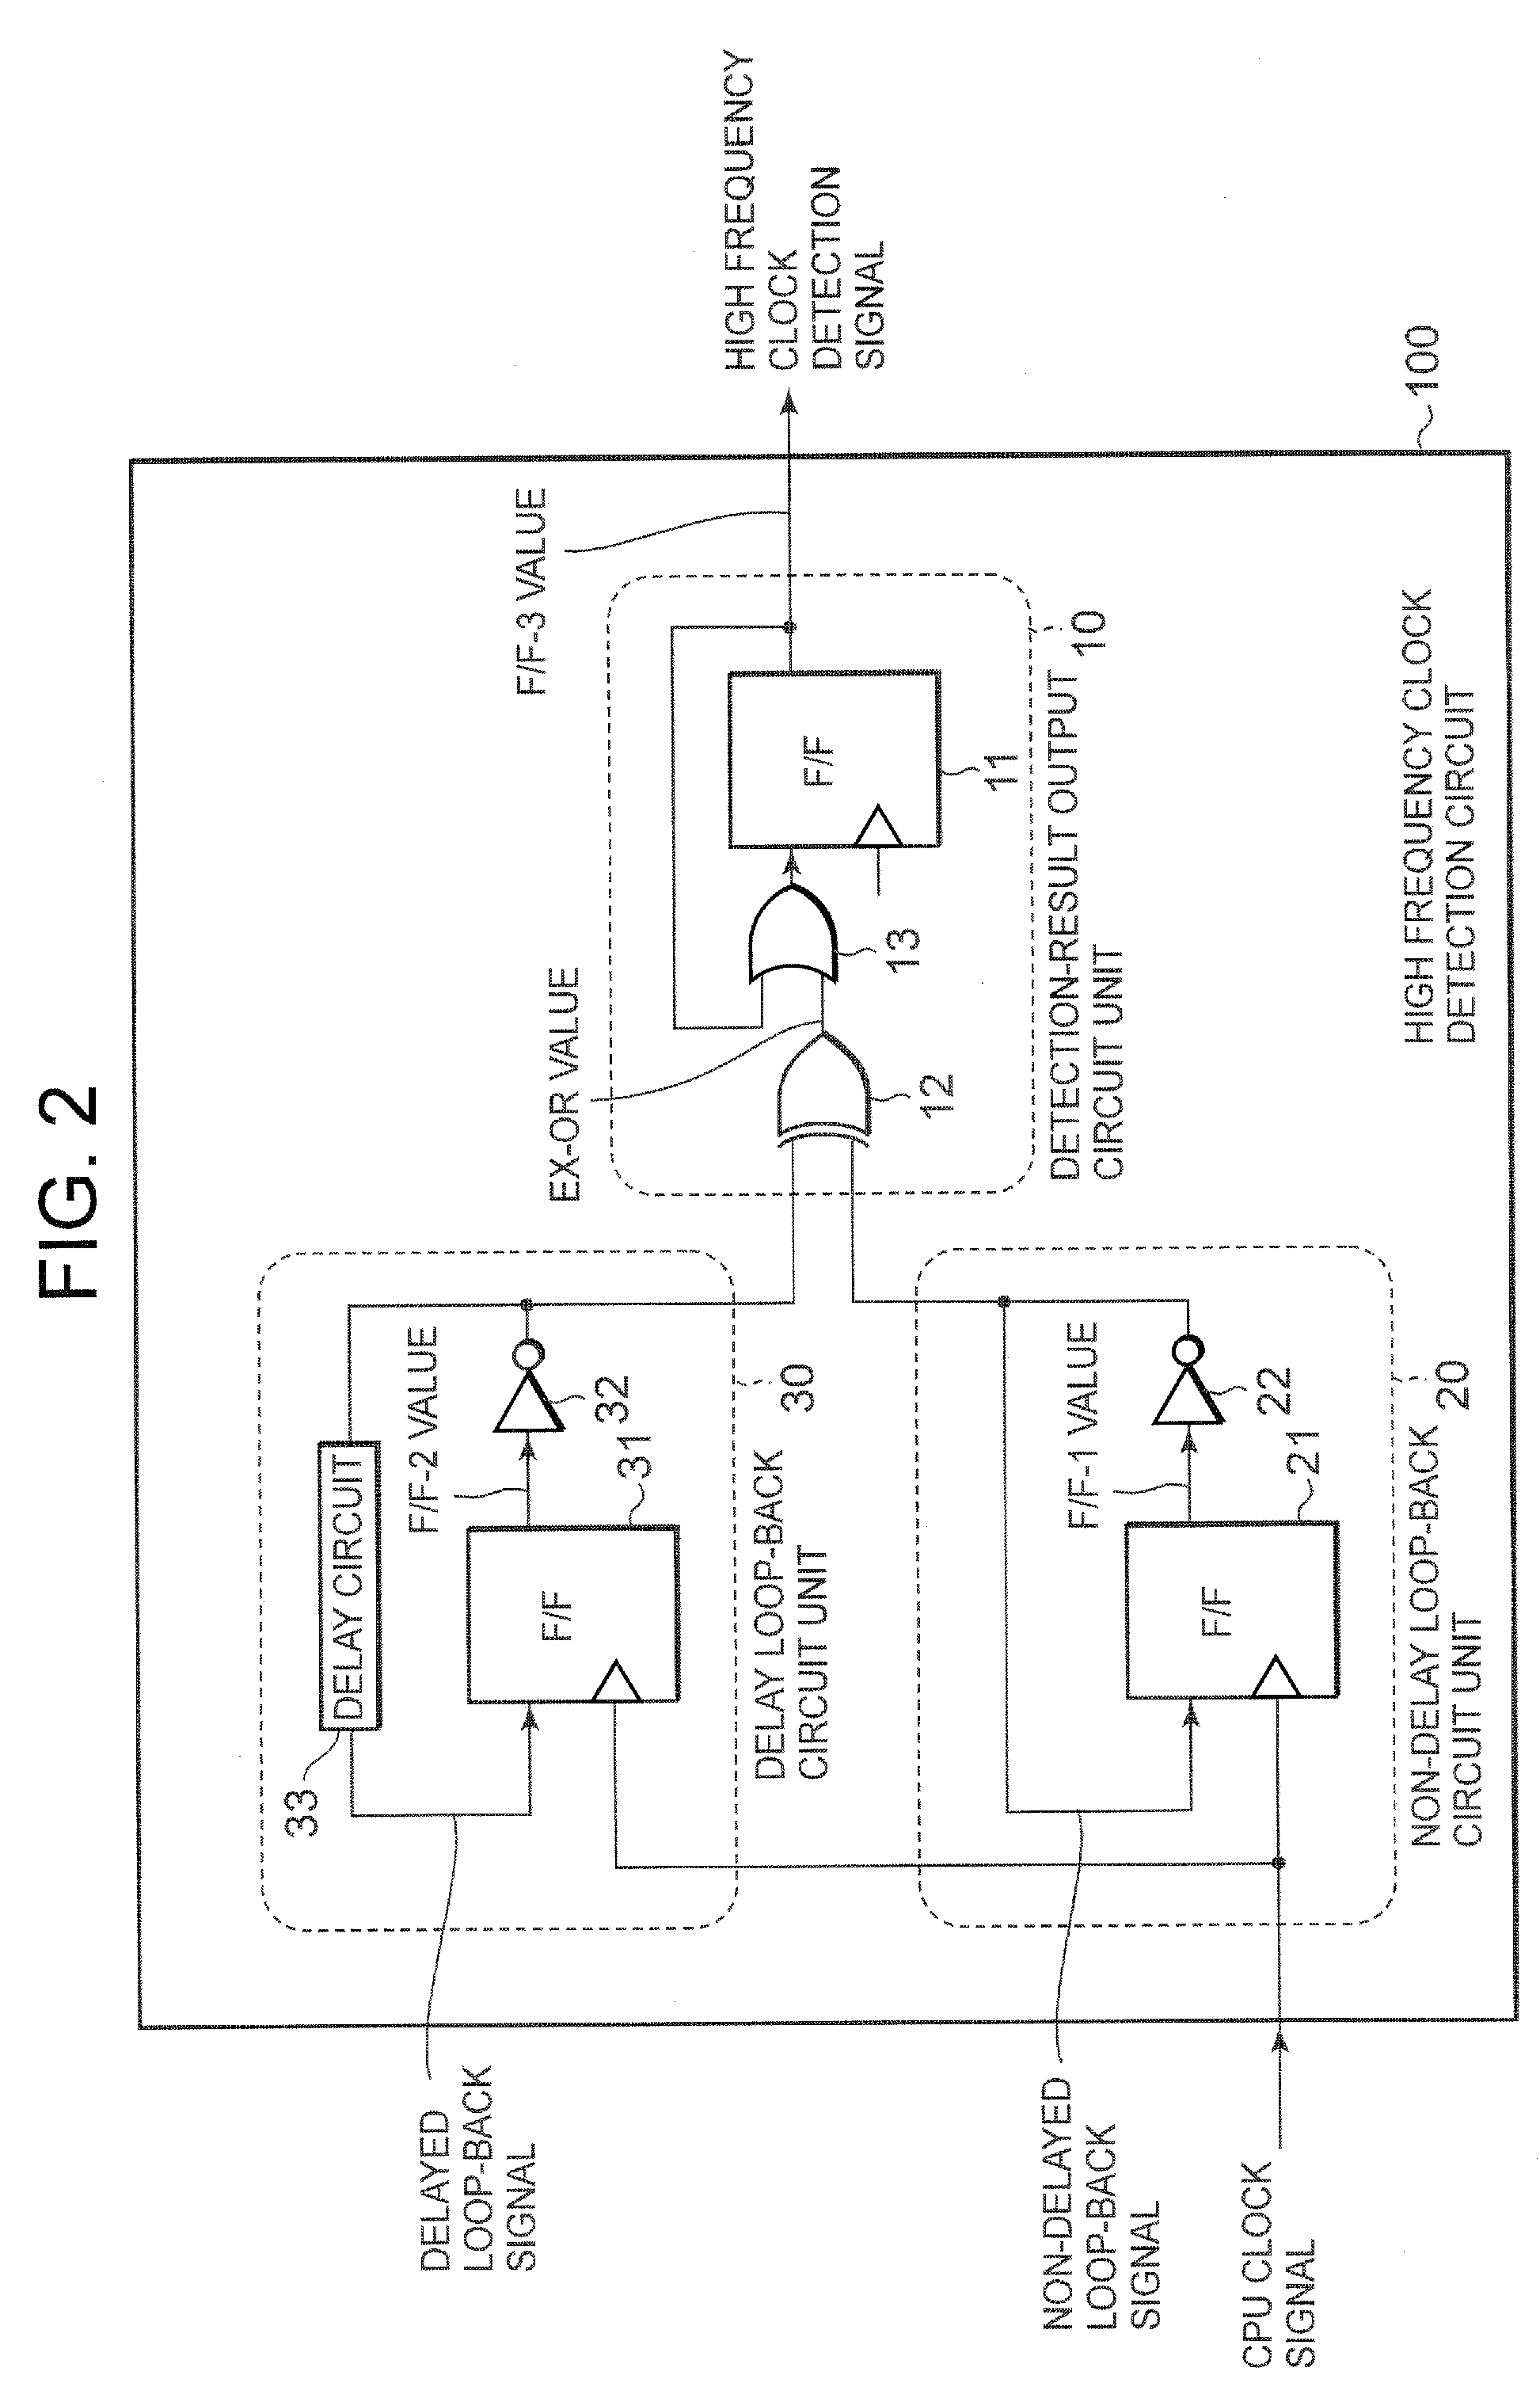 High-frequency clock detection circuit